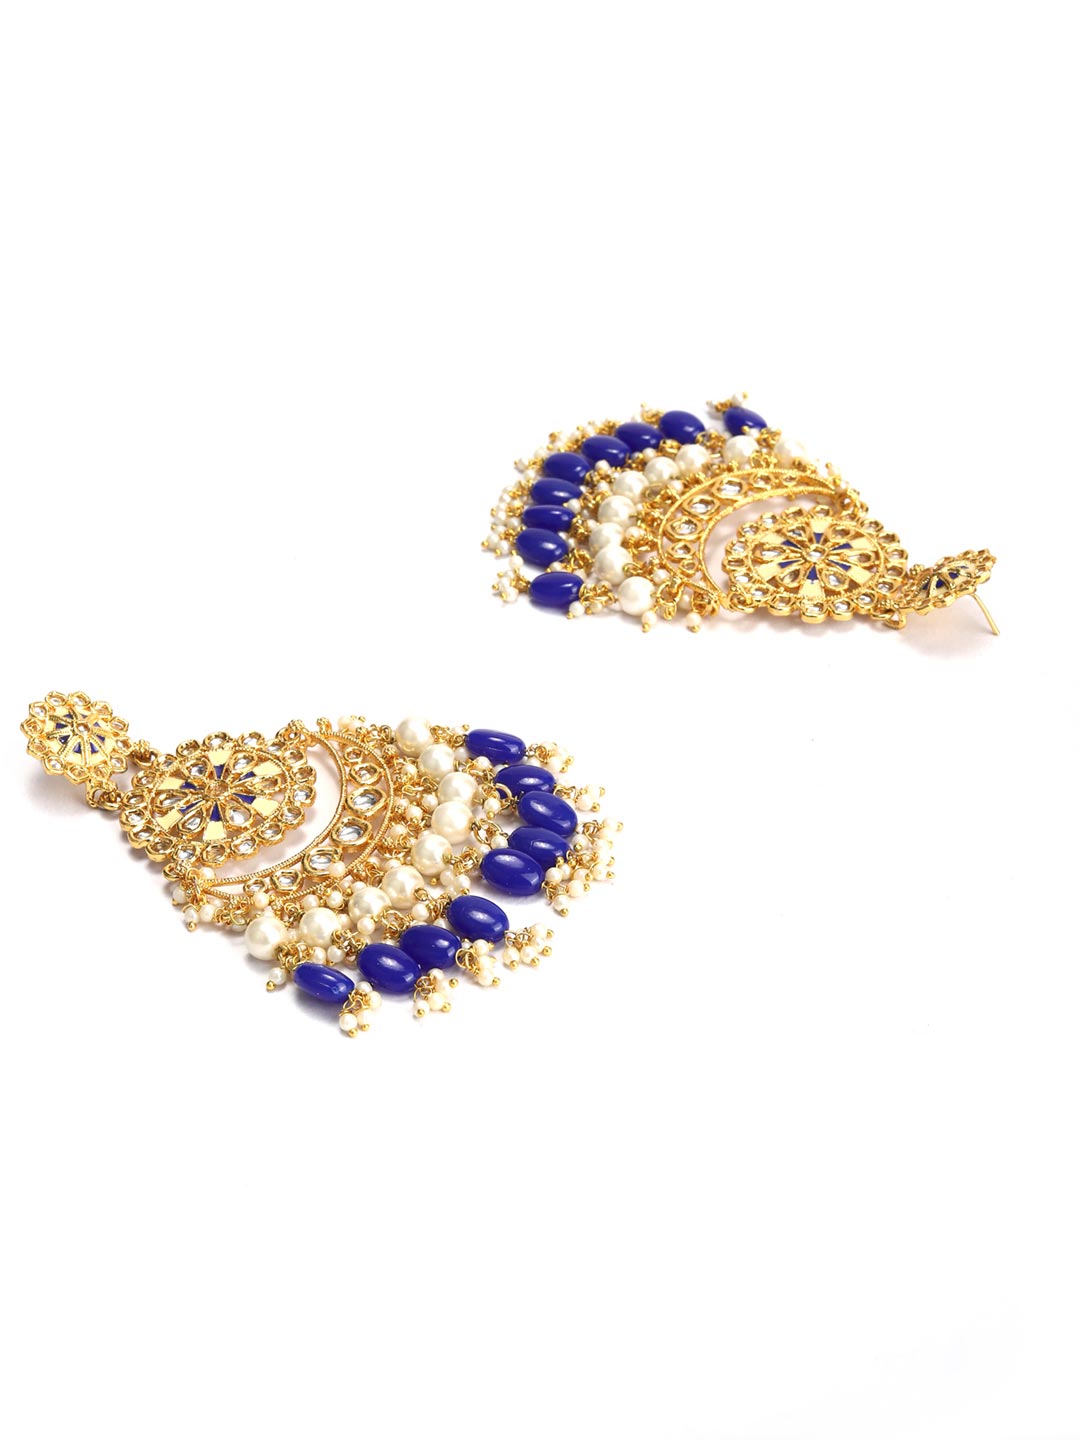 Buy Sarah Golden Metal Twisted Dangler Earrings for Girls and Women Online  at Lowest Price Ever in India | Check Reviews & Ratings - Shop The World